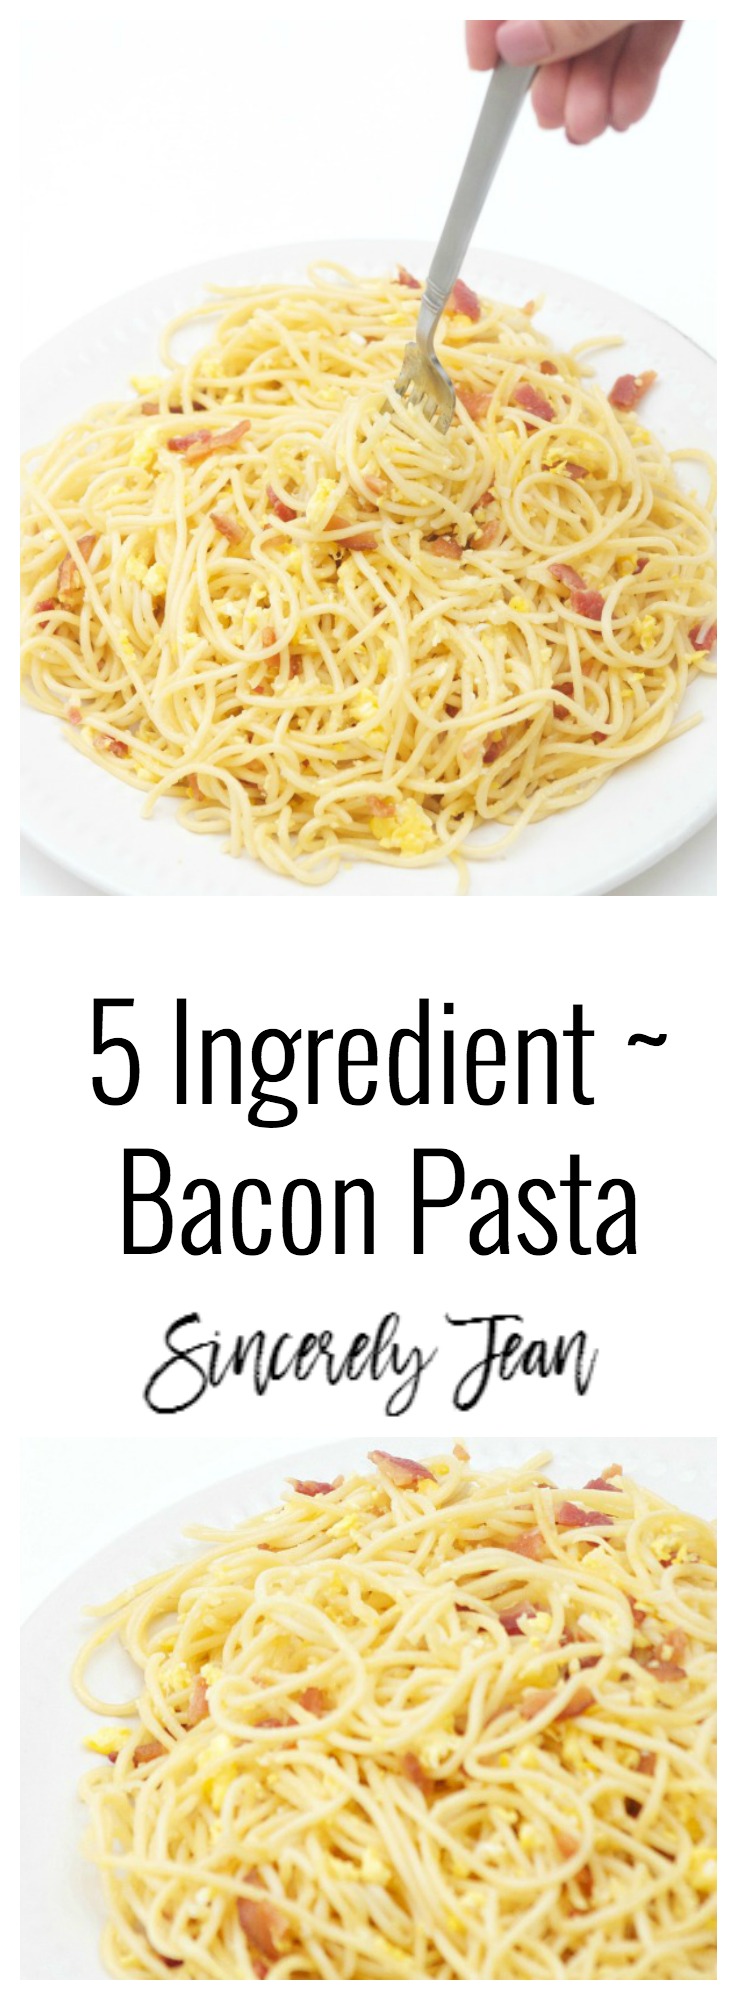 Bacon Pasta- 5 ingredient recipe| simple and easy